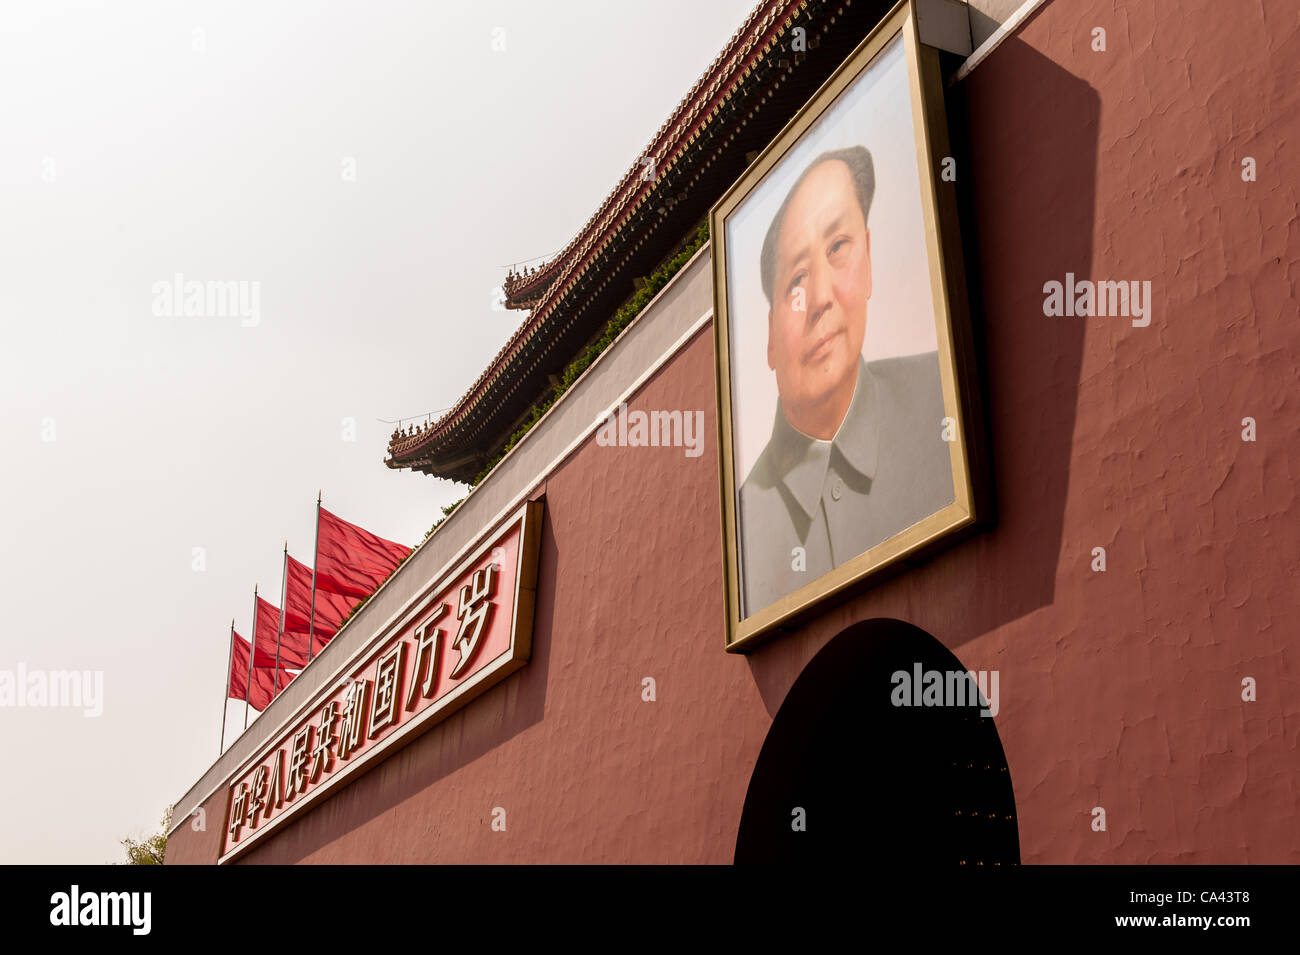 Portrait of Mao Zedong at the Gate of Heavenly Peace (Tiananmen) on the north side of Tiananmen Square, Beijing, China on Monday June 4, 2012. June 4th 2012 marks the 23rd anniversary of the military crackdown on students protests at Tiananmen Square in 1989. Stock Photo